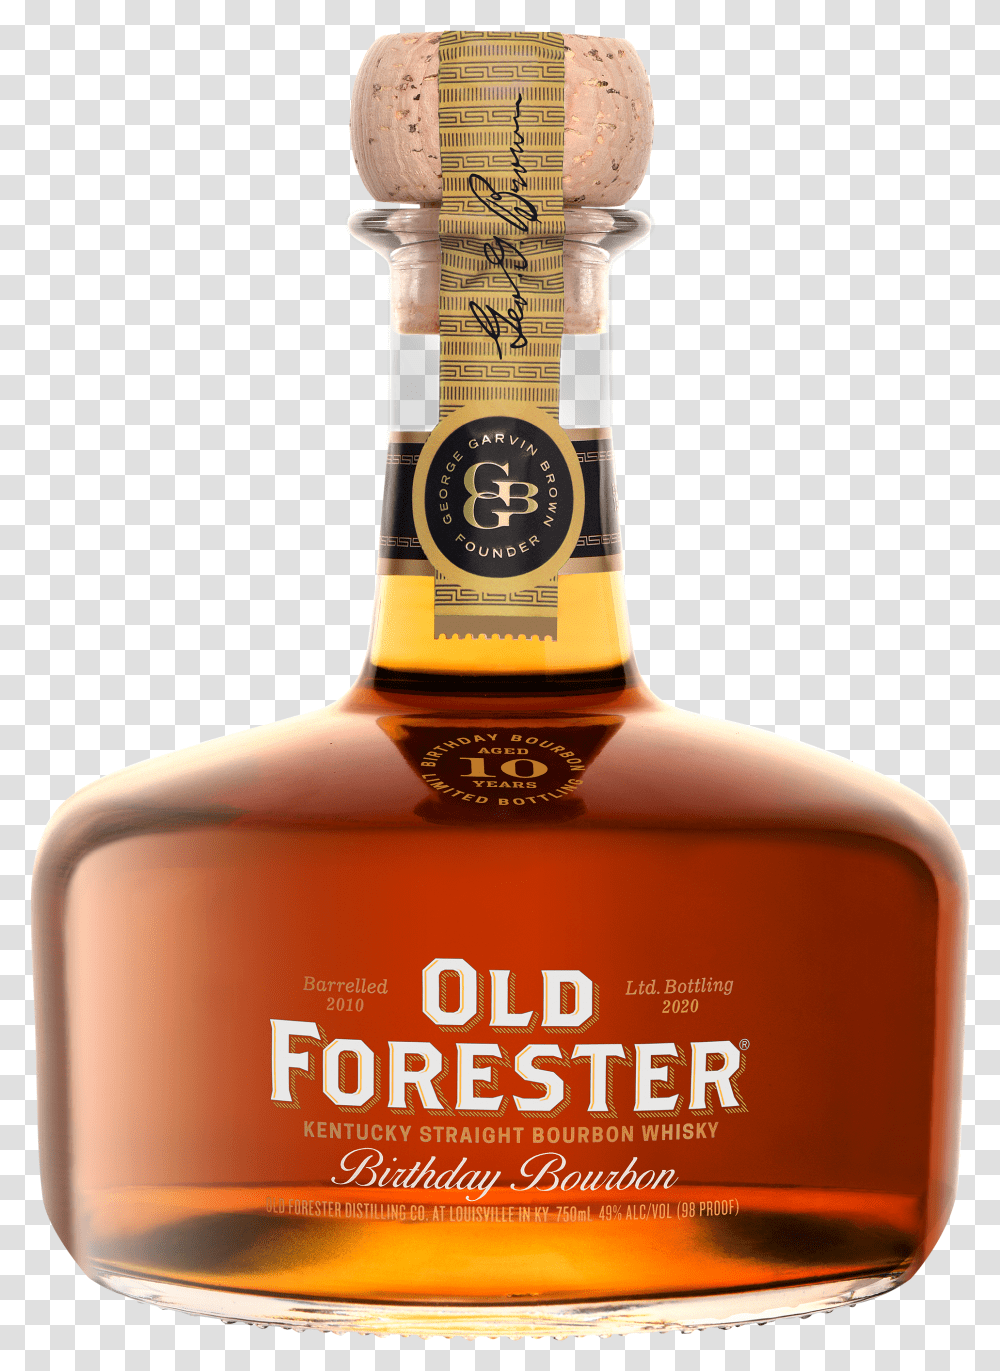 Old Forester 2020 Birthday Bourbon Whisky Old Forester Birthday Bourbon Transparent Png